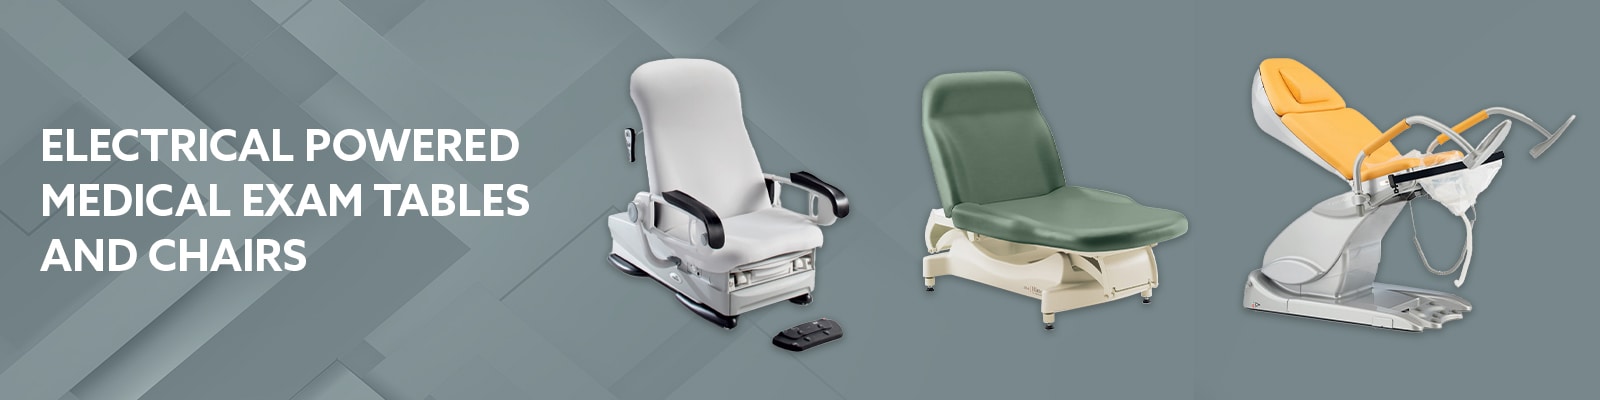 Electrical Powered Medical Exam Tables & Chairs - Henry Schein Medical